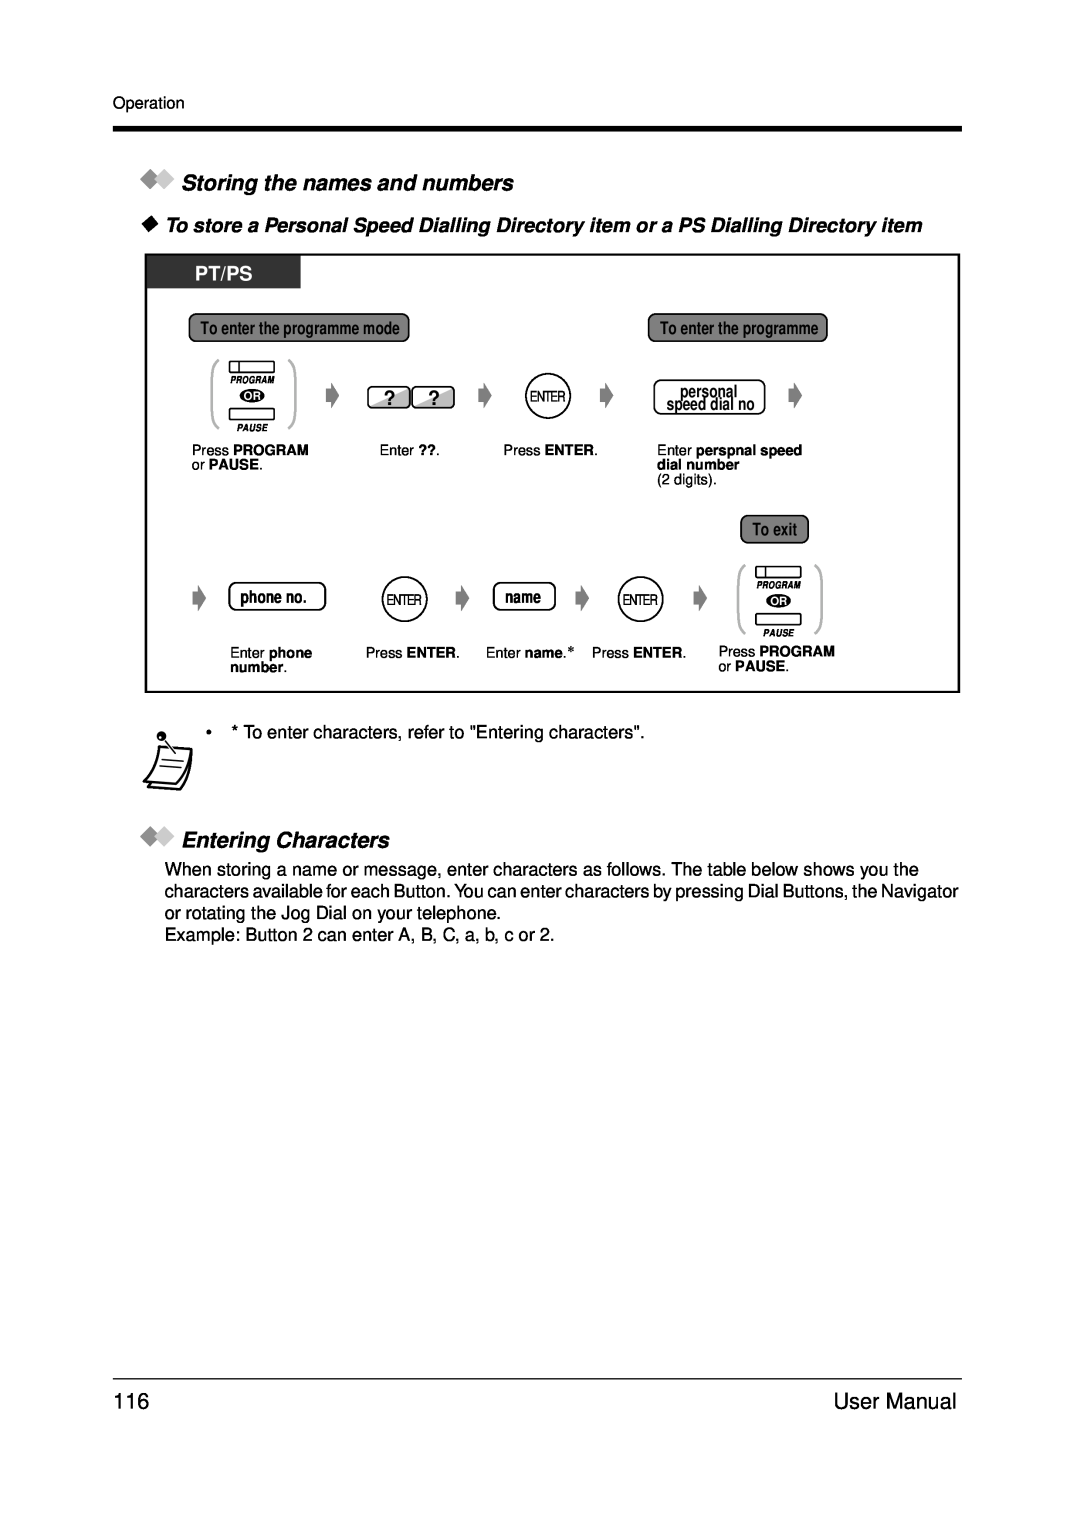 Panasonic KX-TDA200 user manual Storing the names and numbers, Entering Characters, Pt/Ps, To exit, phone no 